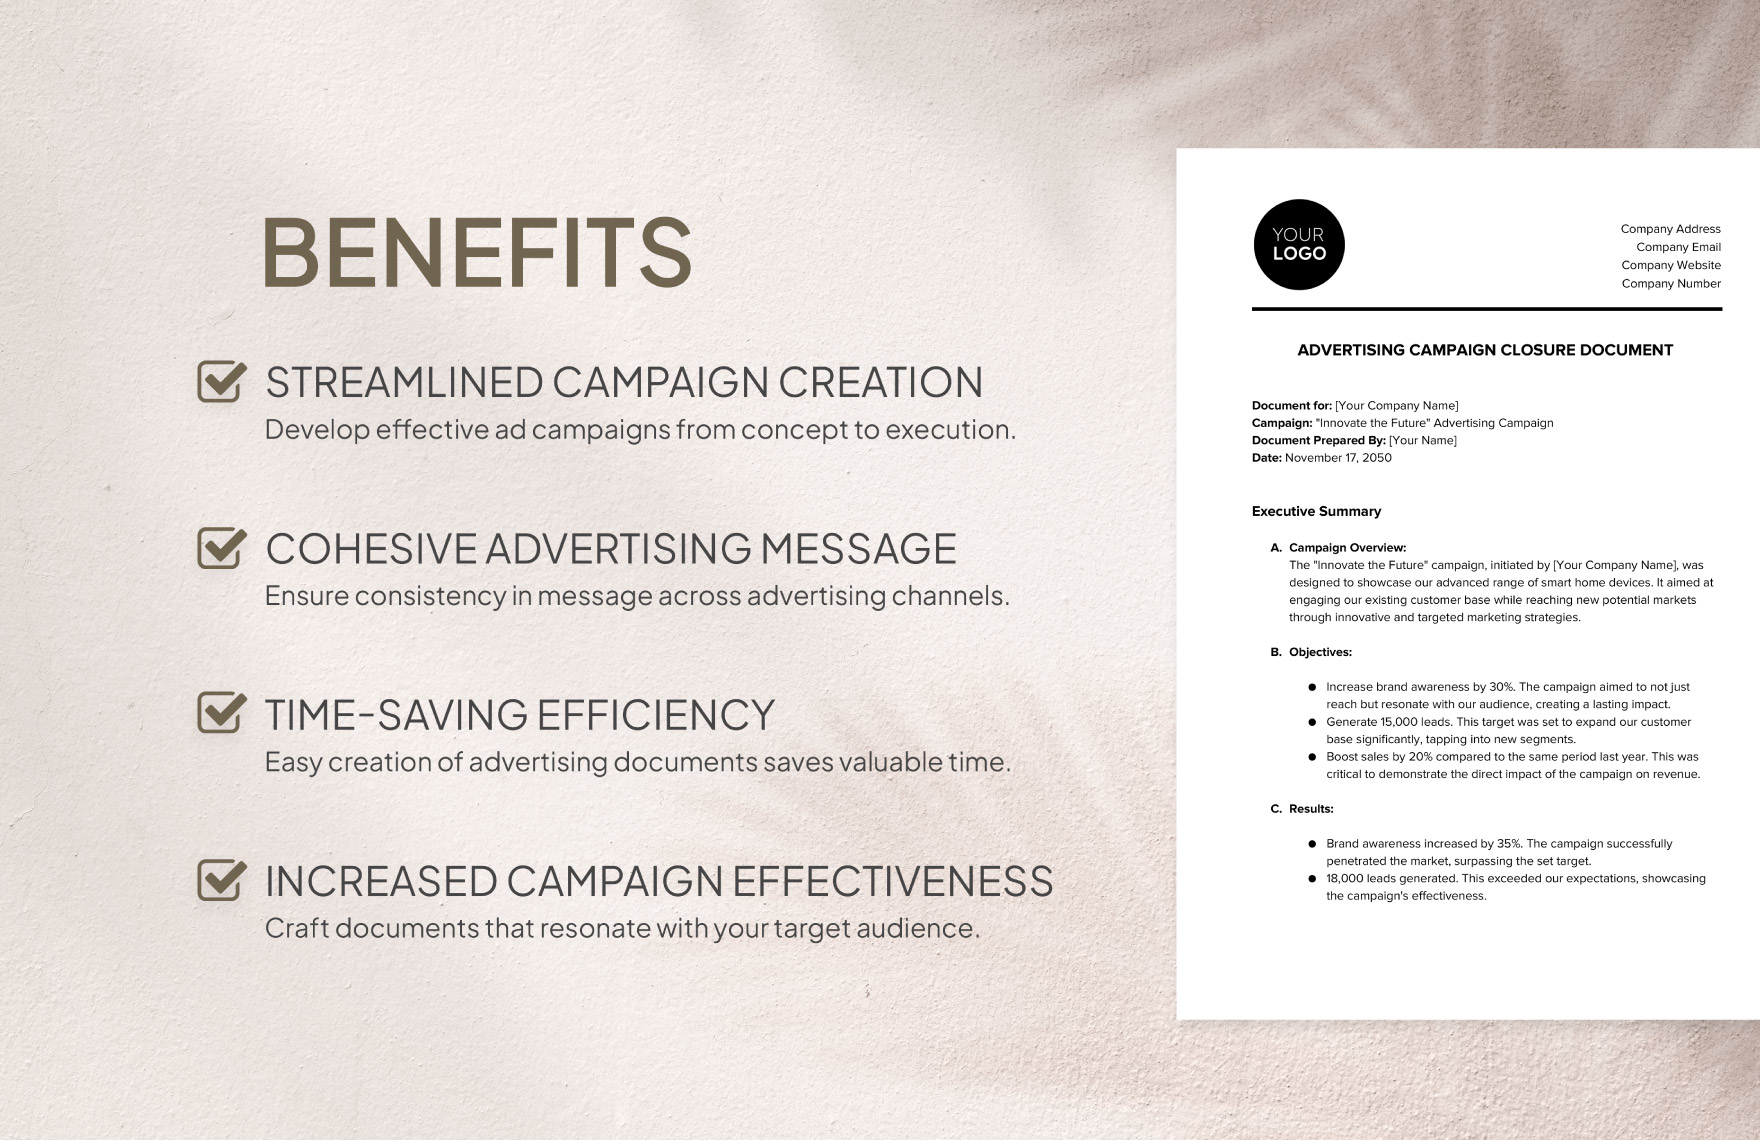 Advertising Campaign Closure Document Template